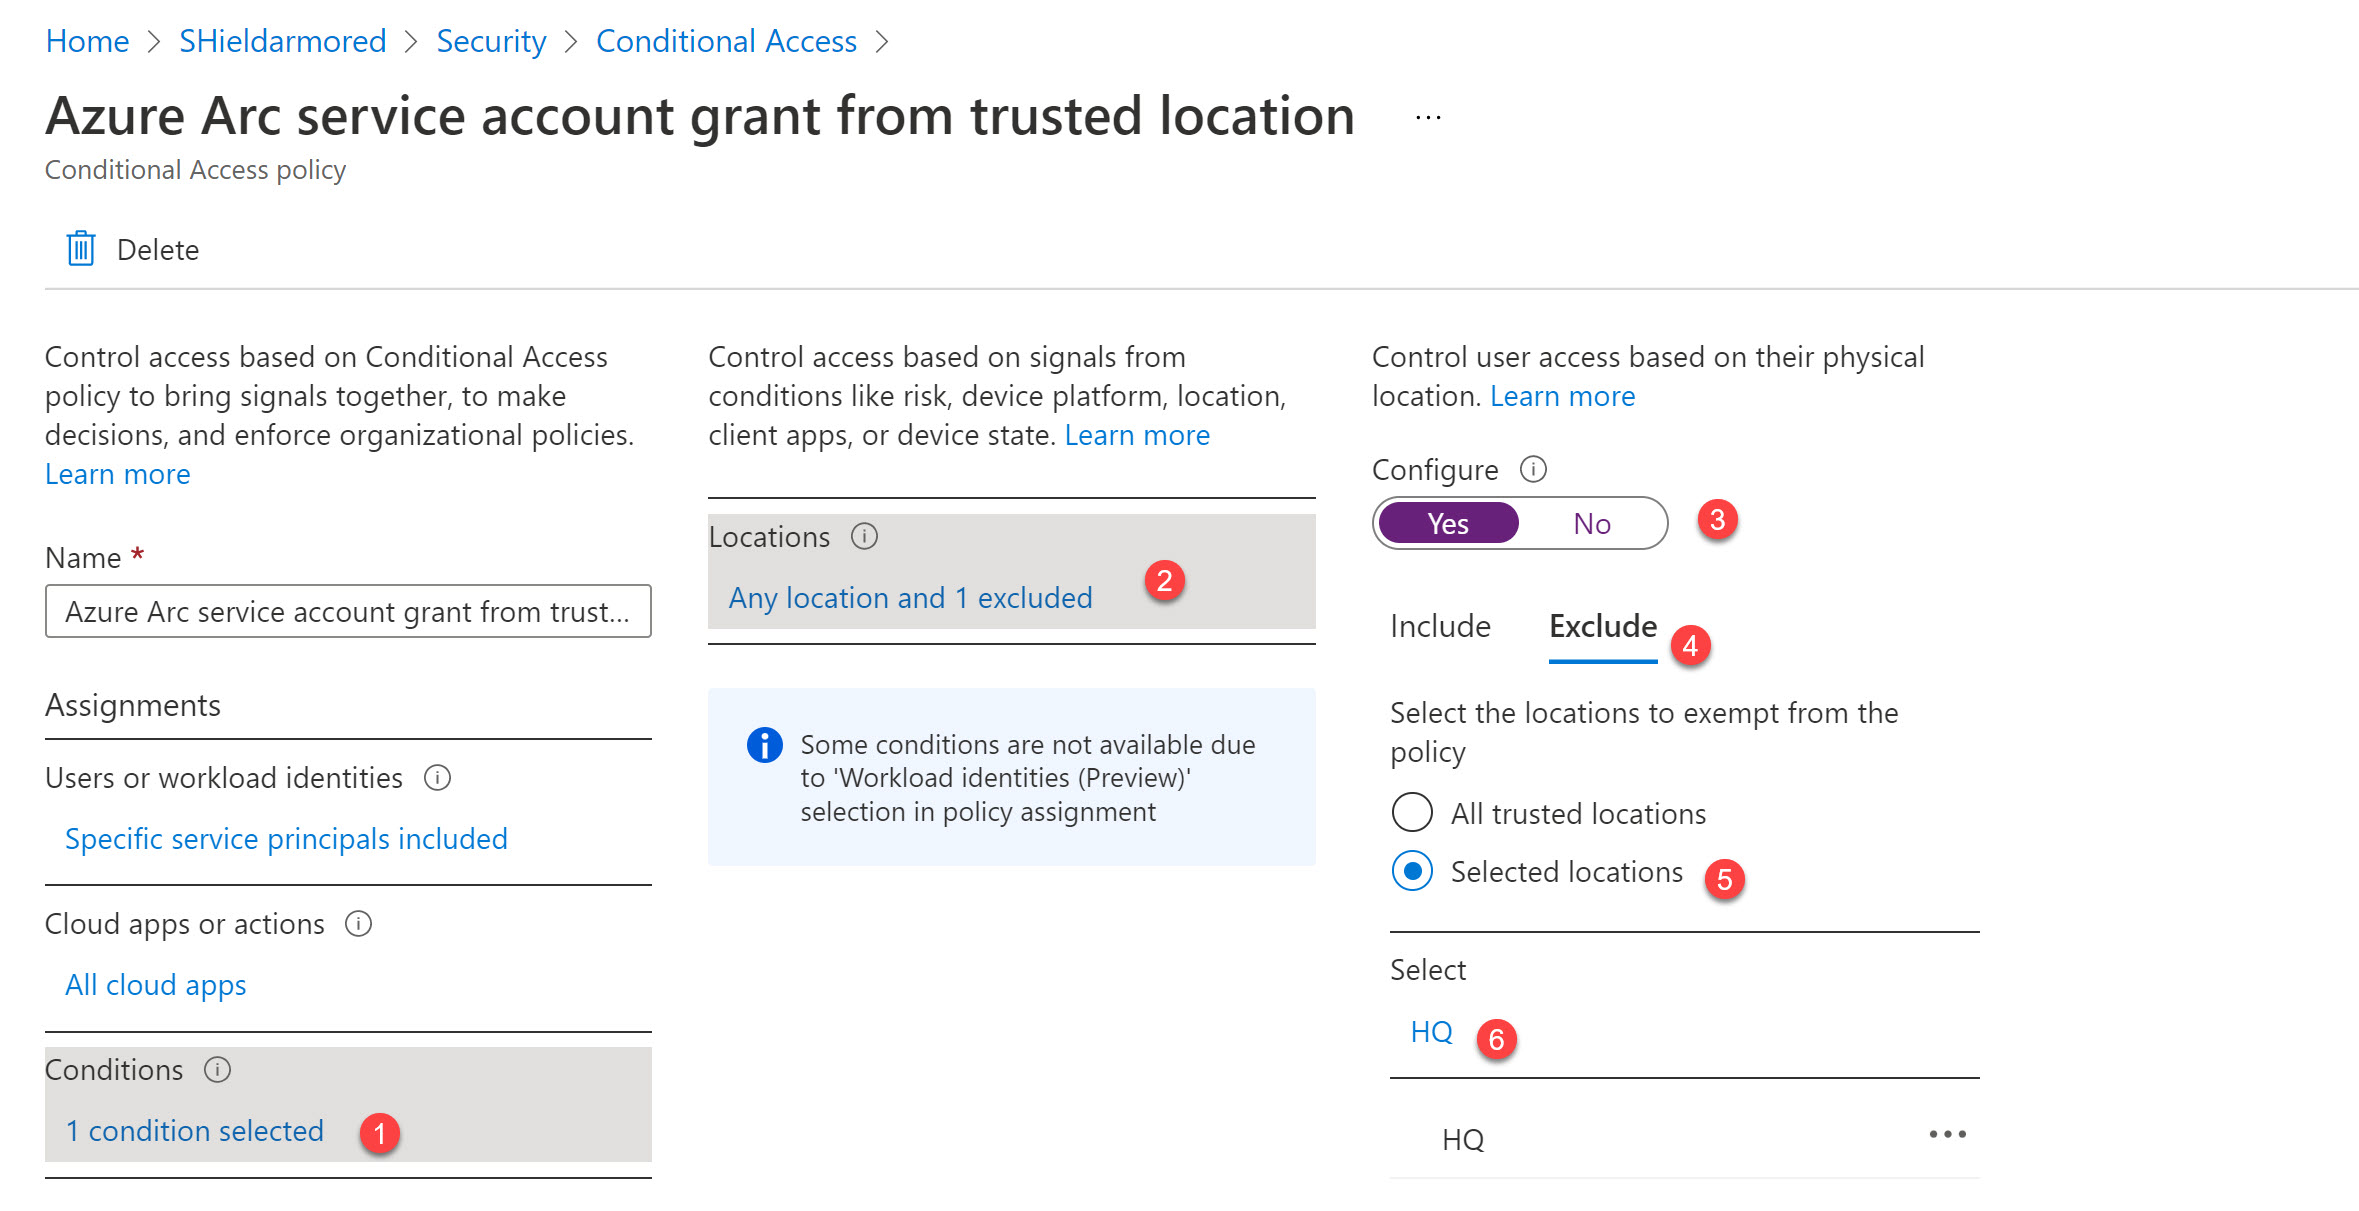 Exclude trusted locations from blocking